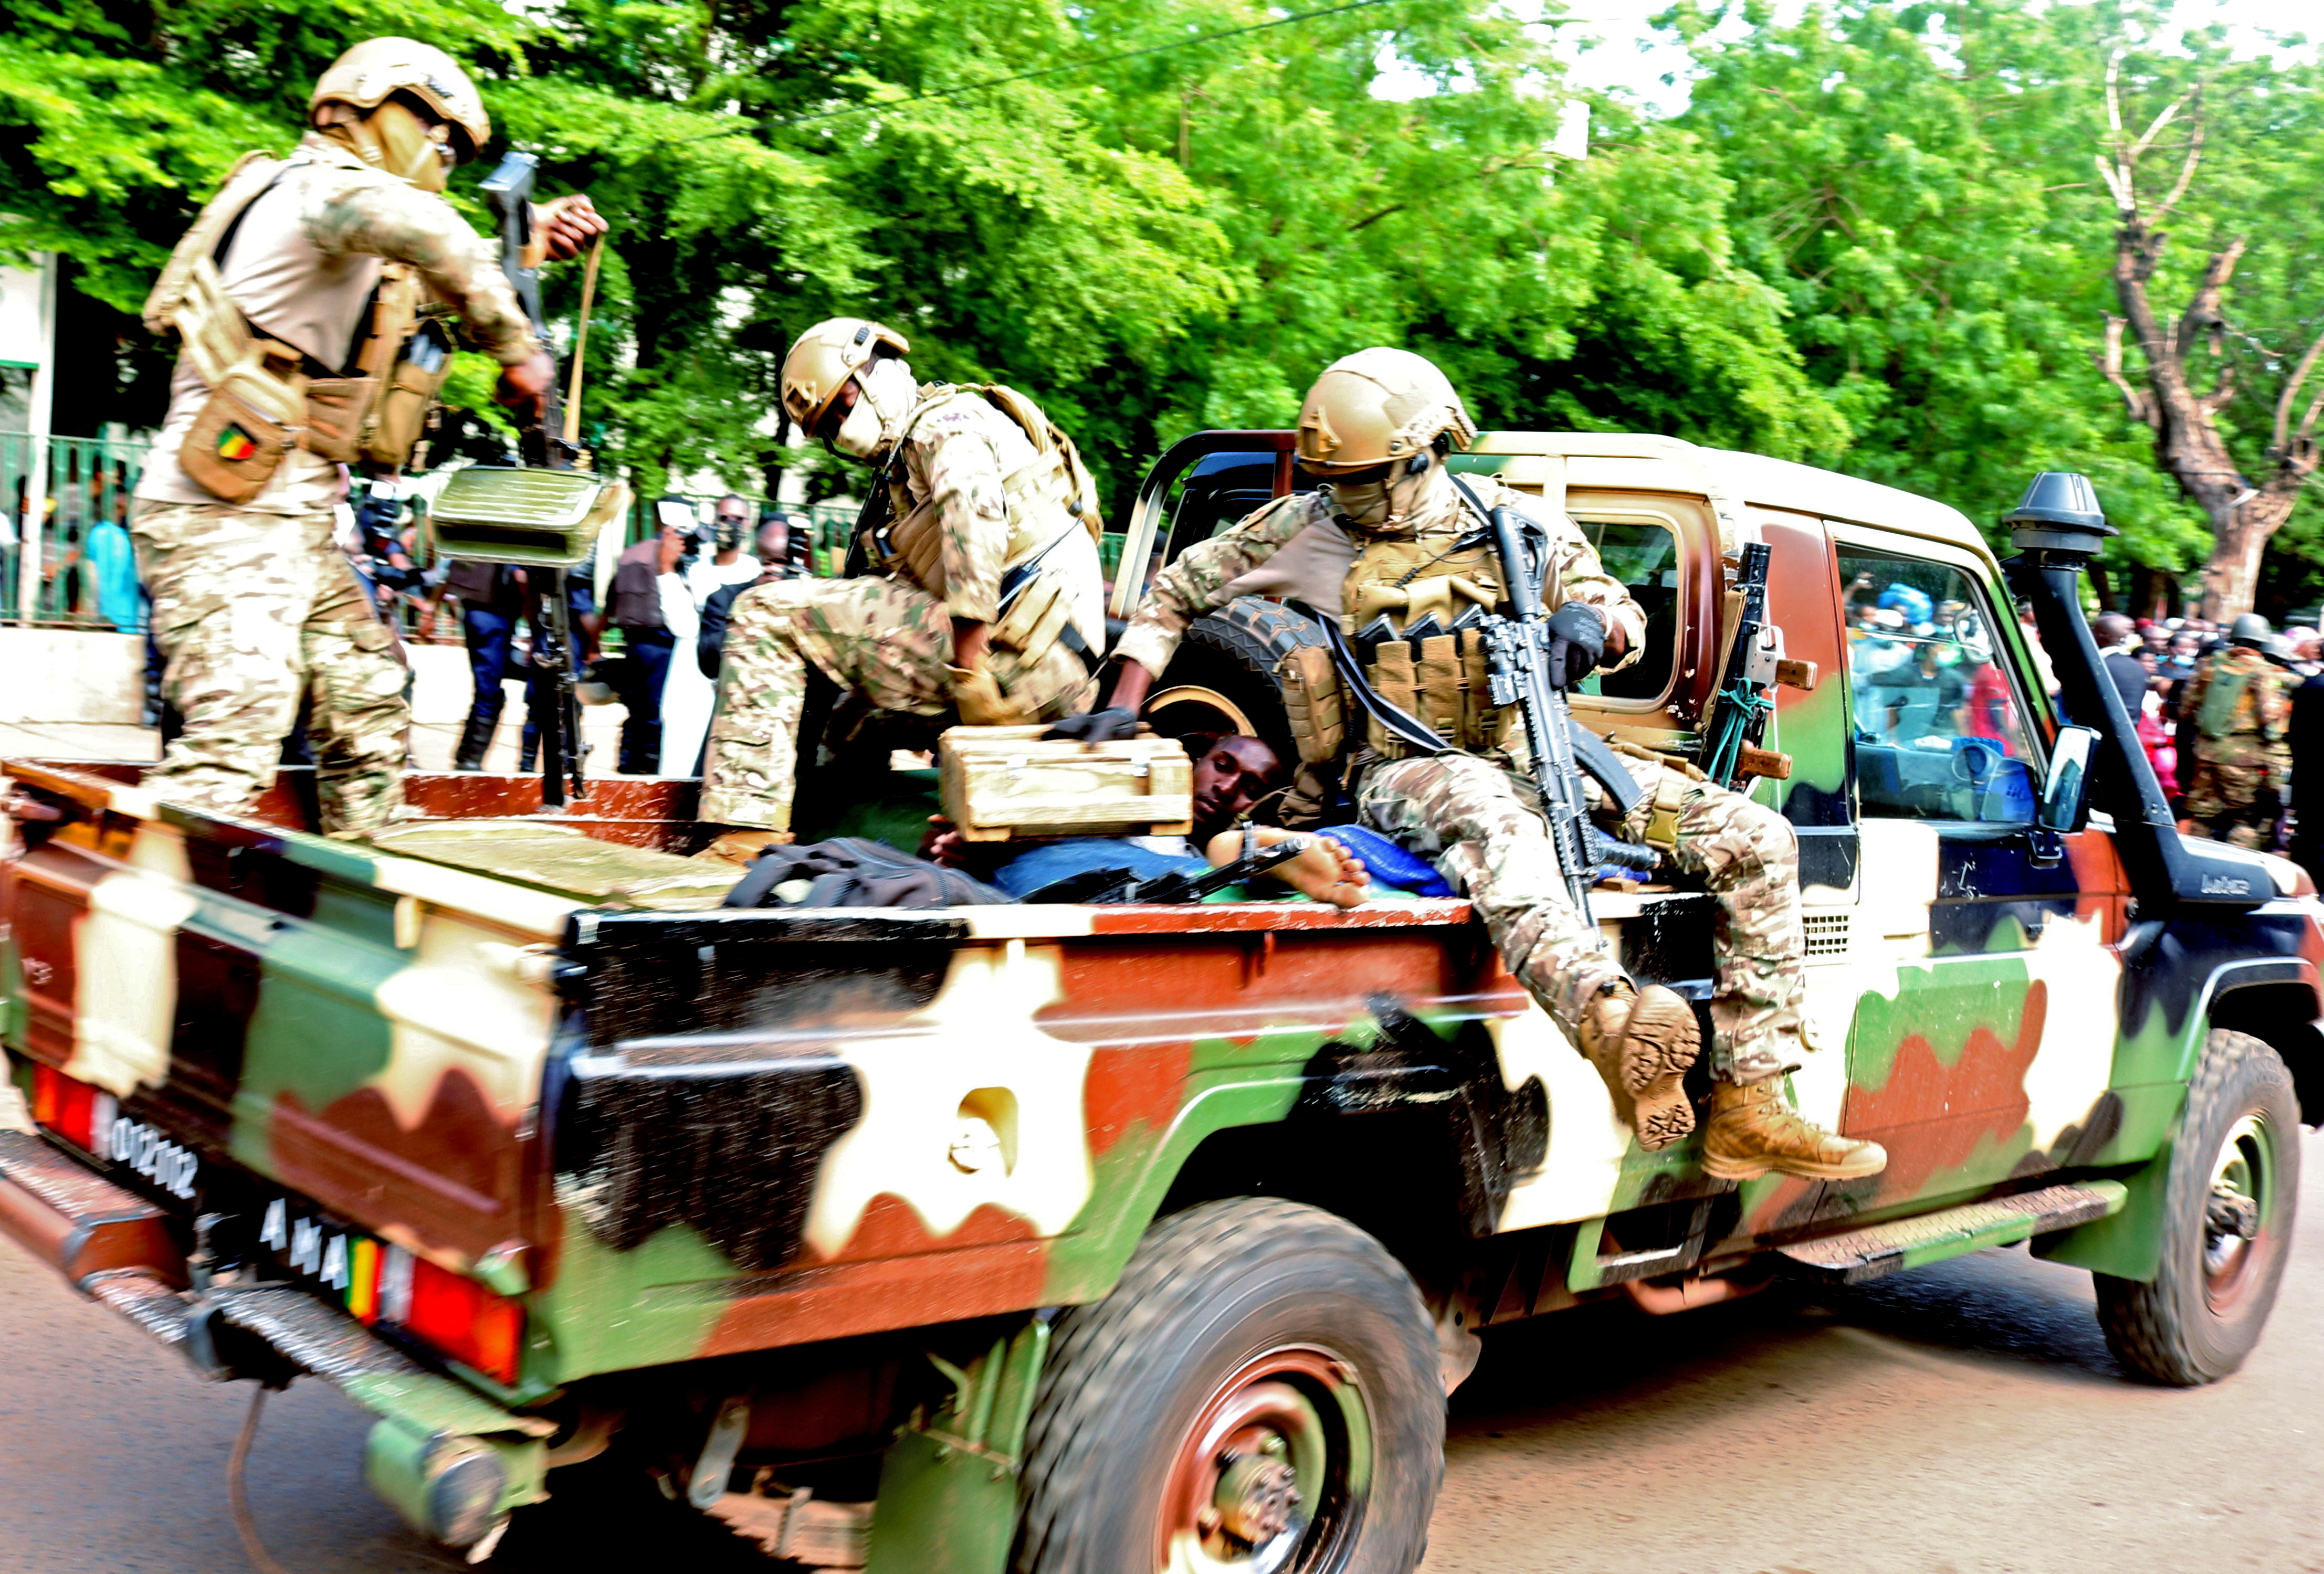 An assailant who attempted to stab Mali's interim president Colonel Assimi Goita, is seen lying in an army vehicle after he was arrested in Bamako